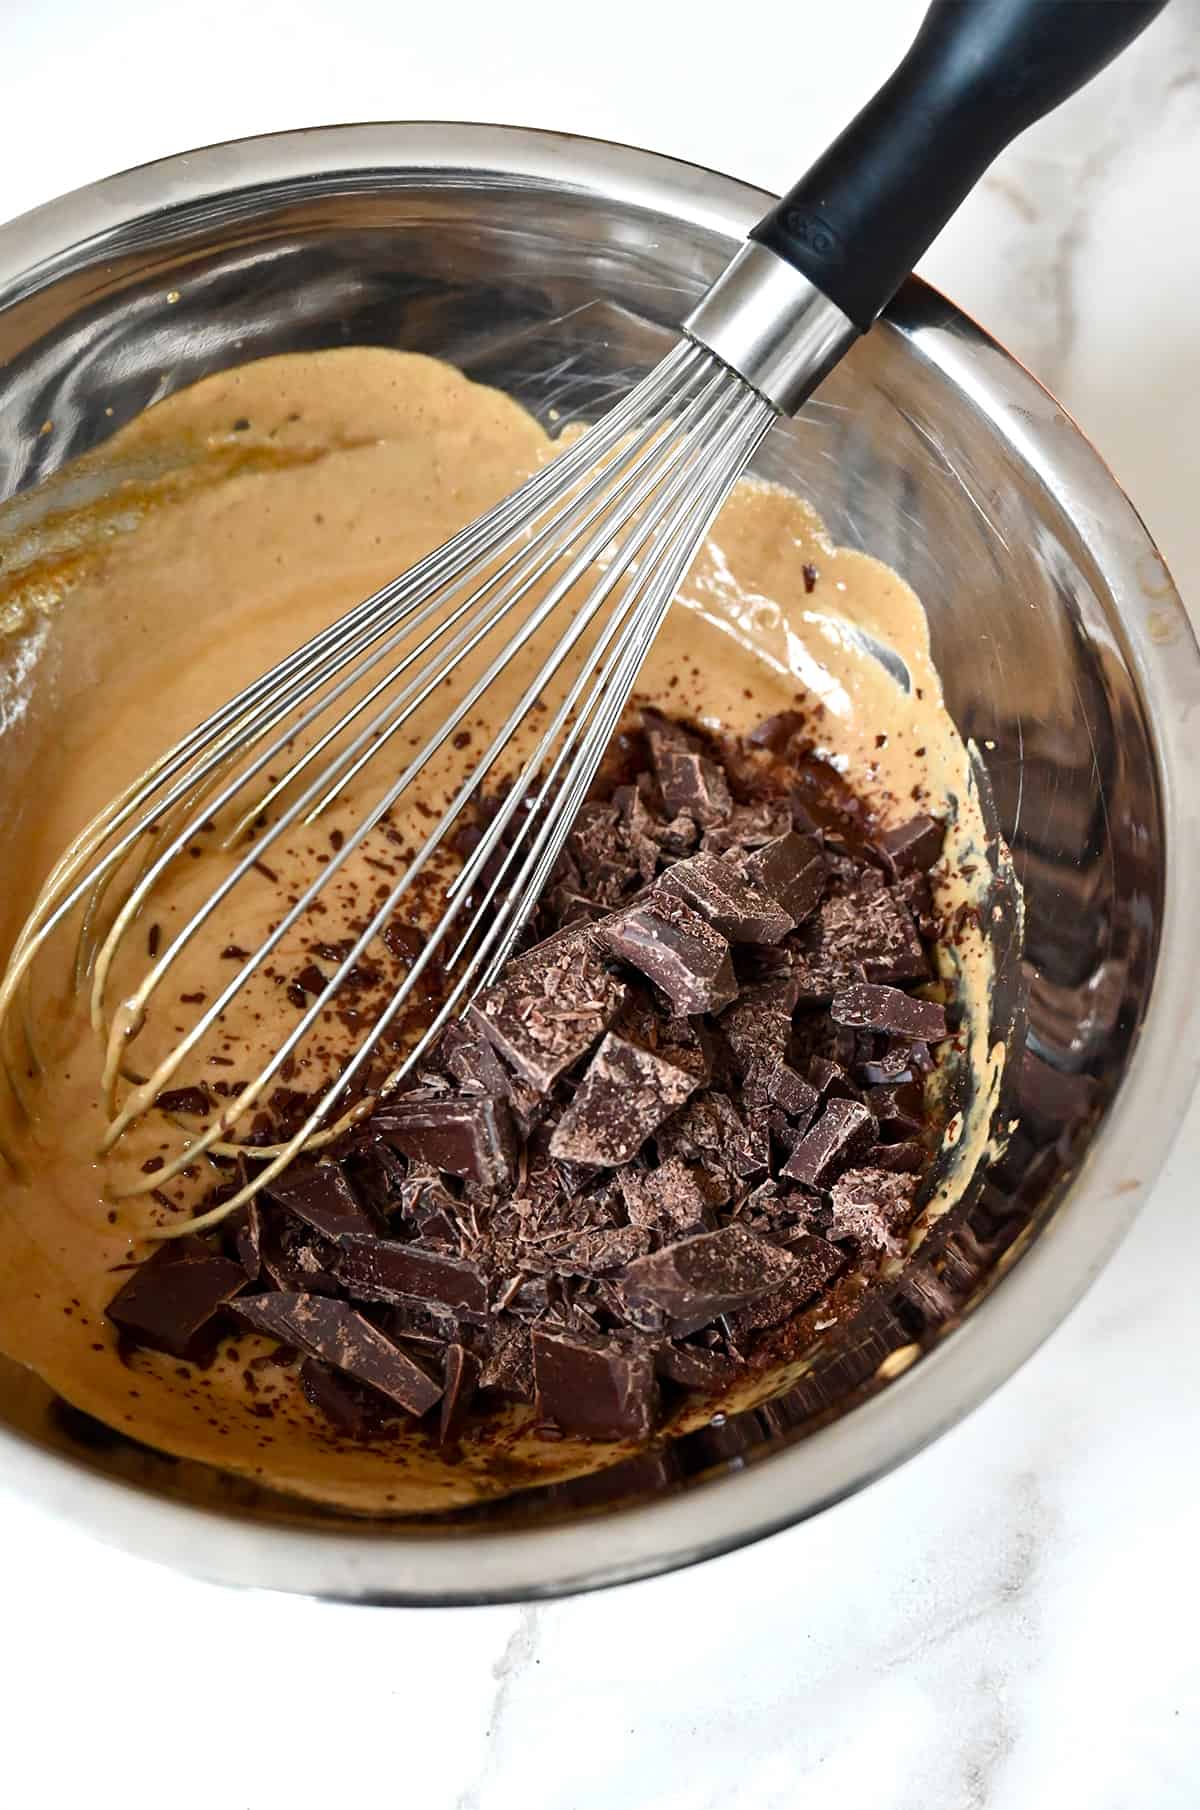 Chopped chocolate being whisked into an egg yolk-espresso mixture in a stainless steel bowl.